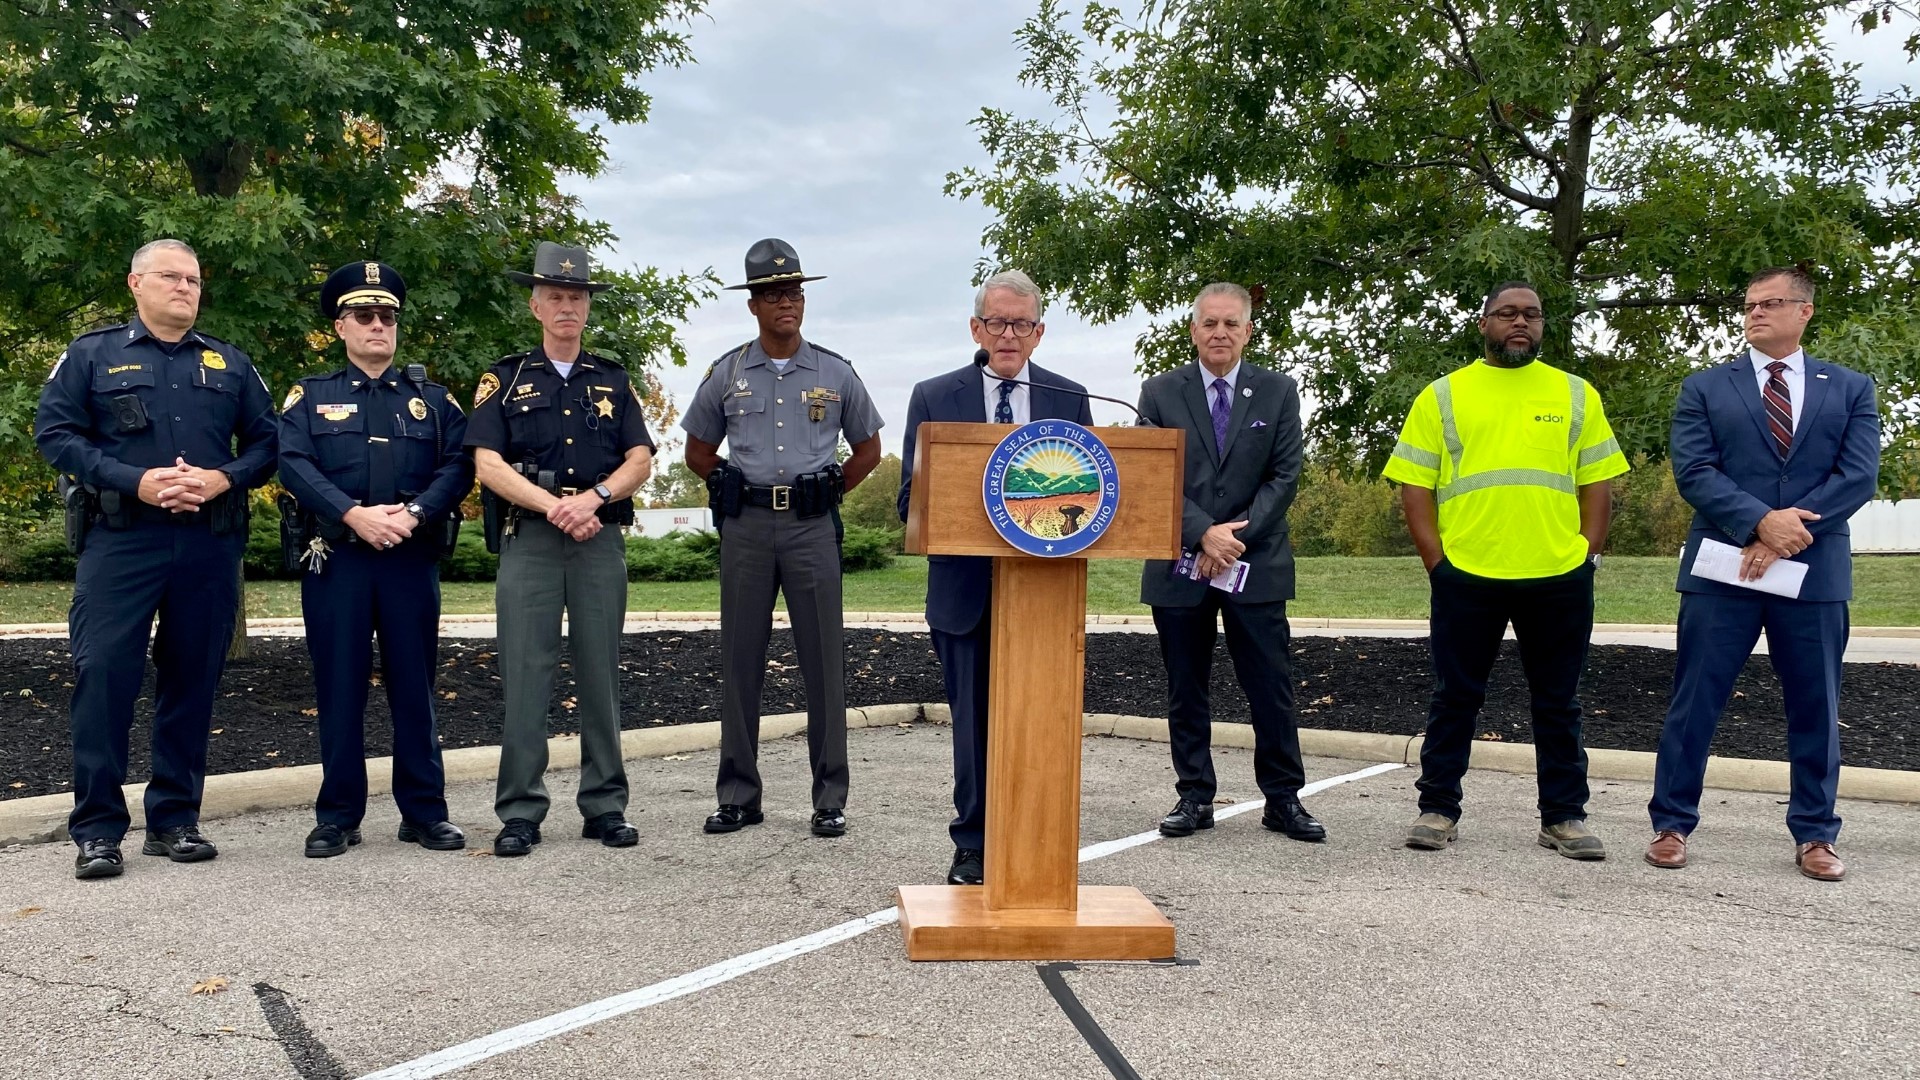 Distracted driving crashes hit a six-year low last month thanks to a new law aimed at decreasing the number of such accidents, according to Gov. Mike DeWine.